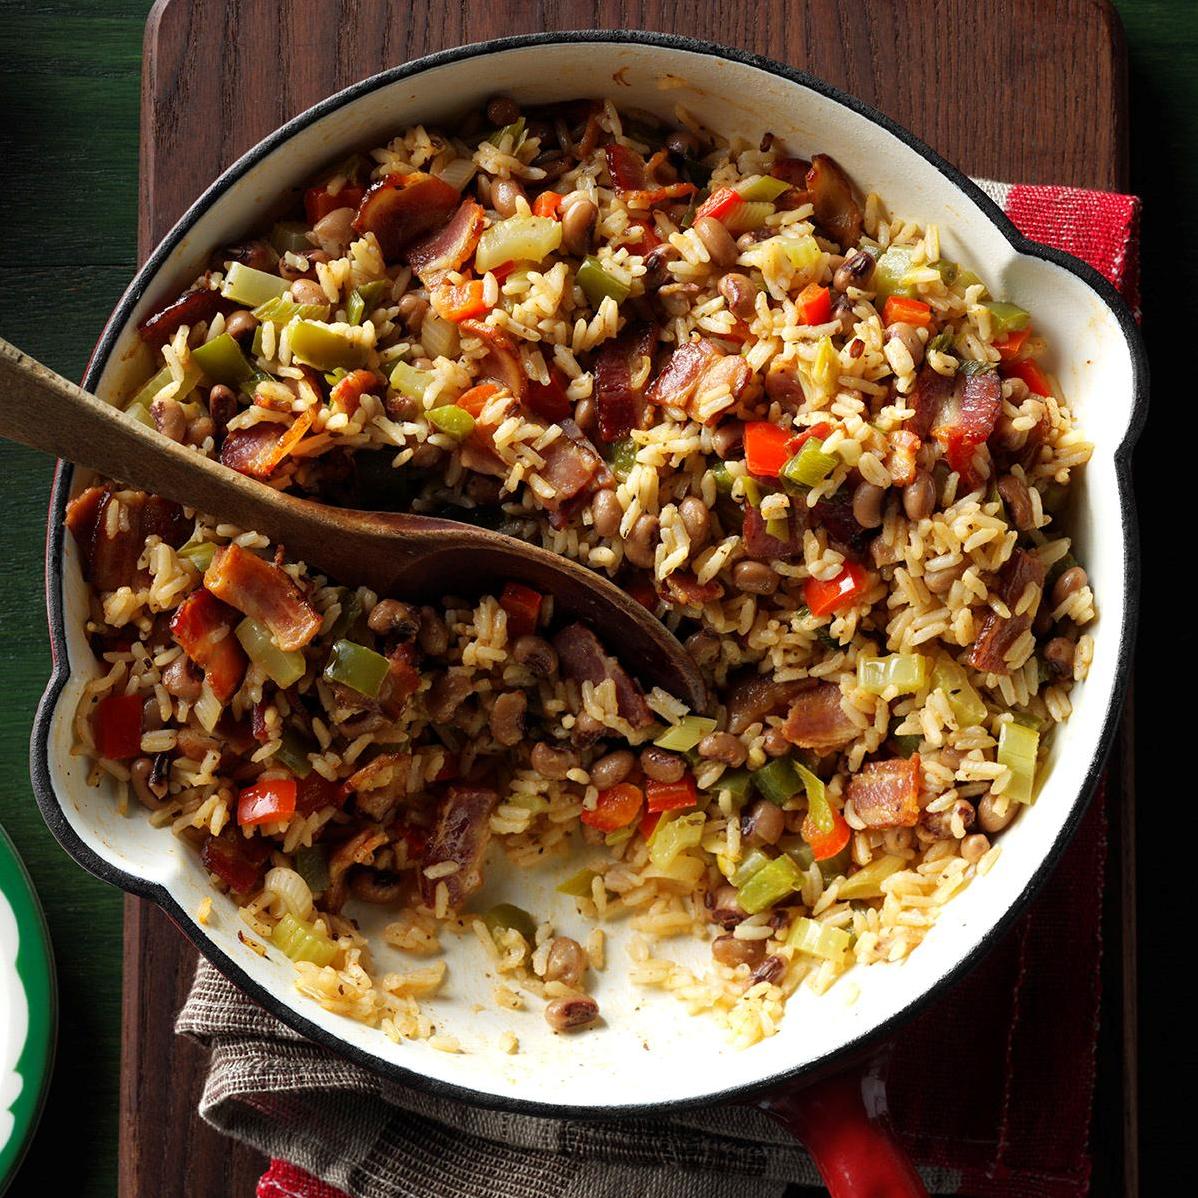  Delicious and filling Southern Style Black-Eyed Peas and Rice Hopping John Recipe!